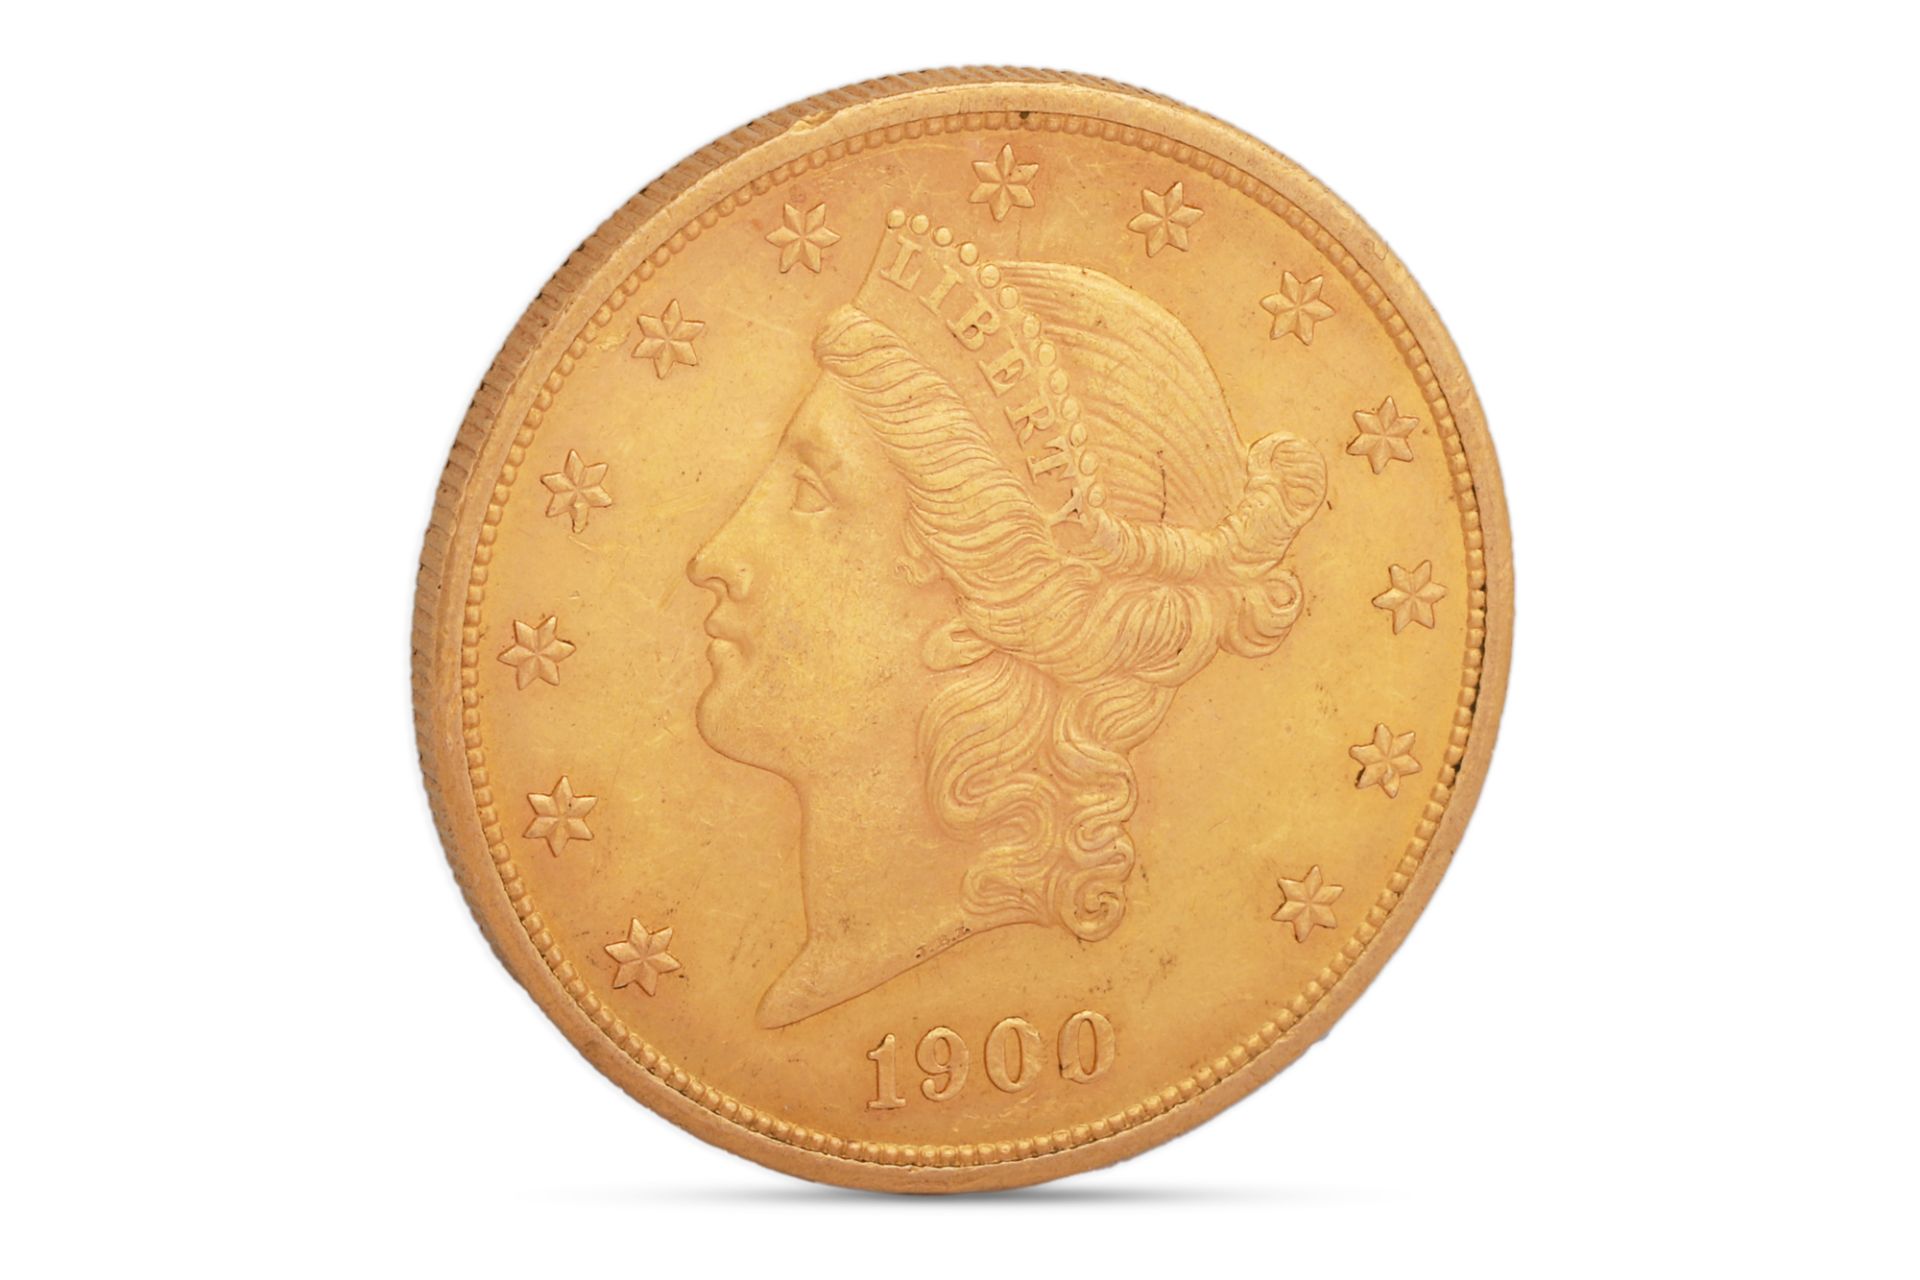 A 1900 AMERICAN DOUBLE EAGLE, $20 US coin. 1Troy OZ gold coin, VF